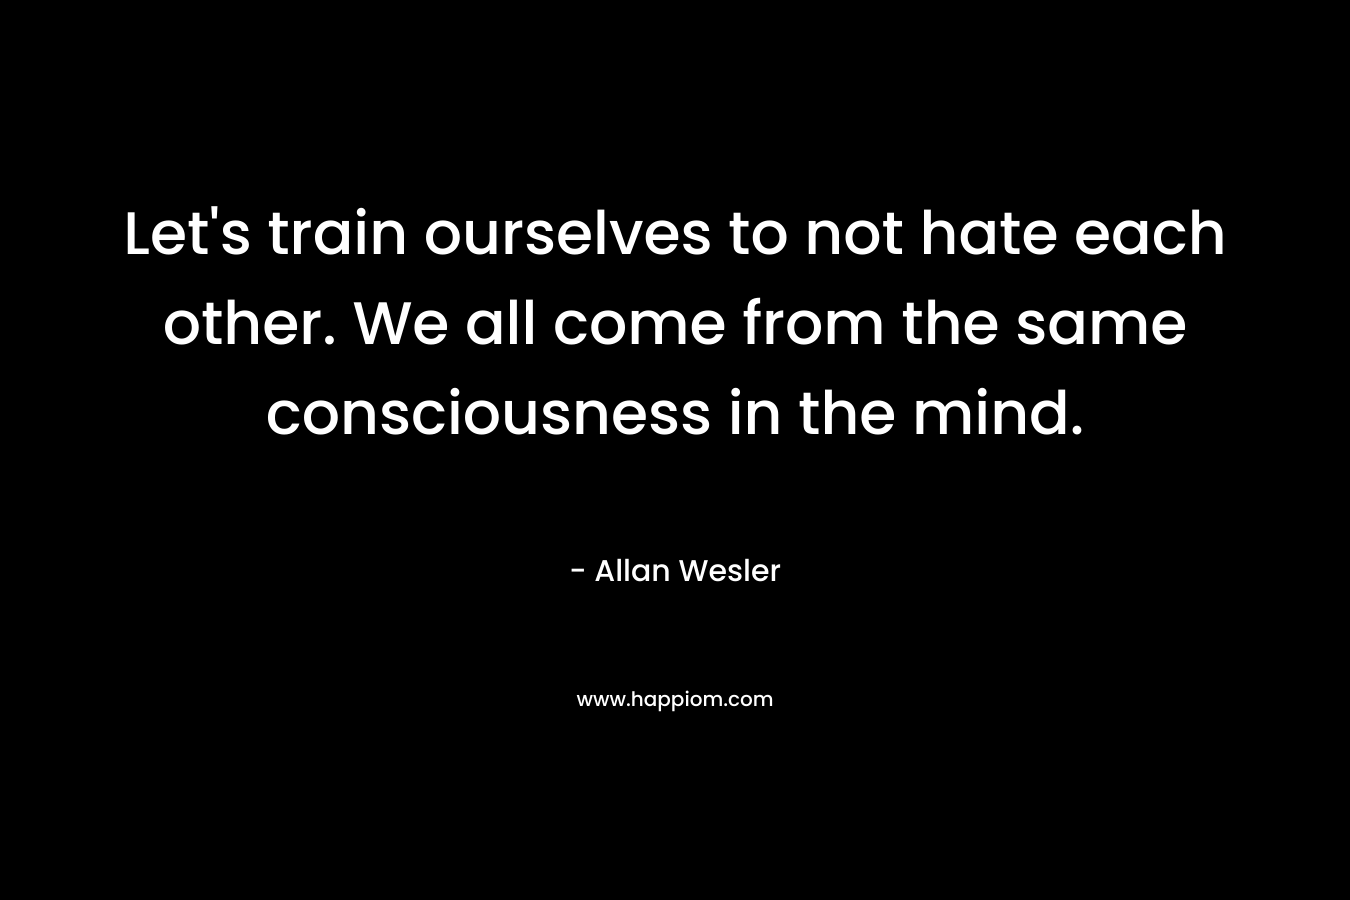 Let’s train ourselves to not hate each other. We all come from the same consciousness in the mind. – Allan Wesler